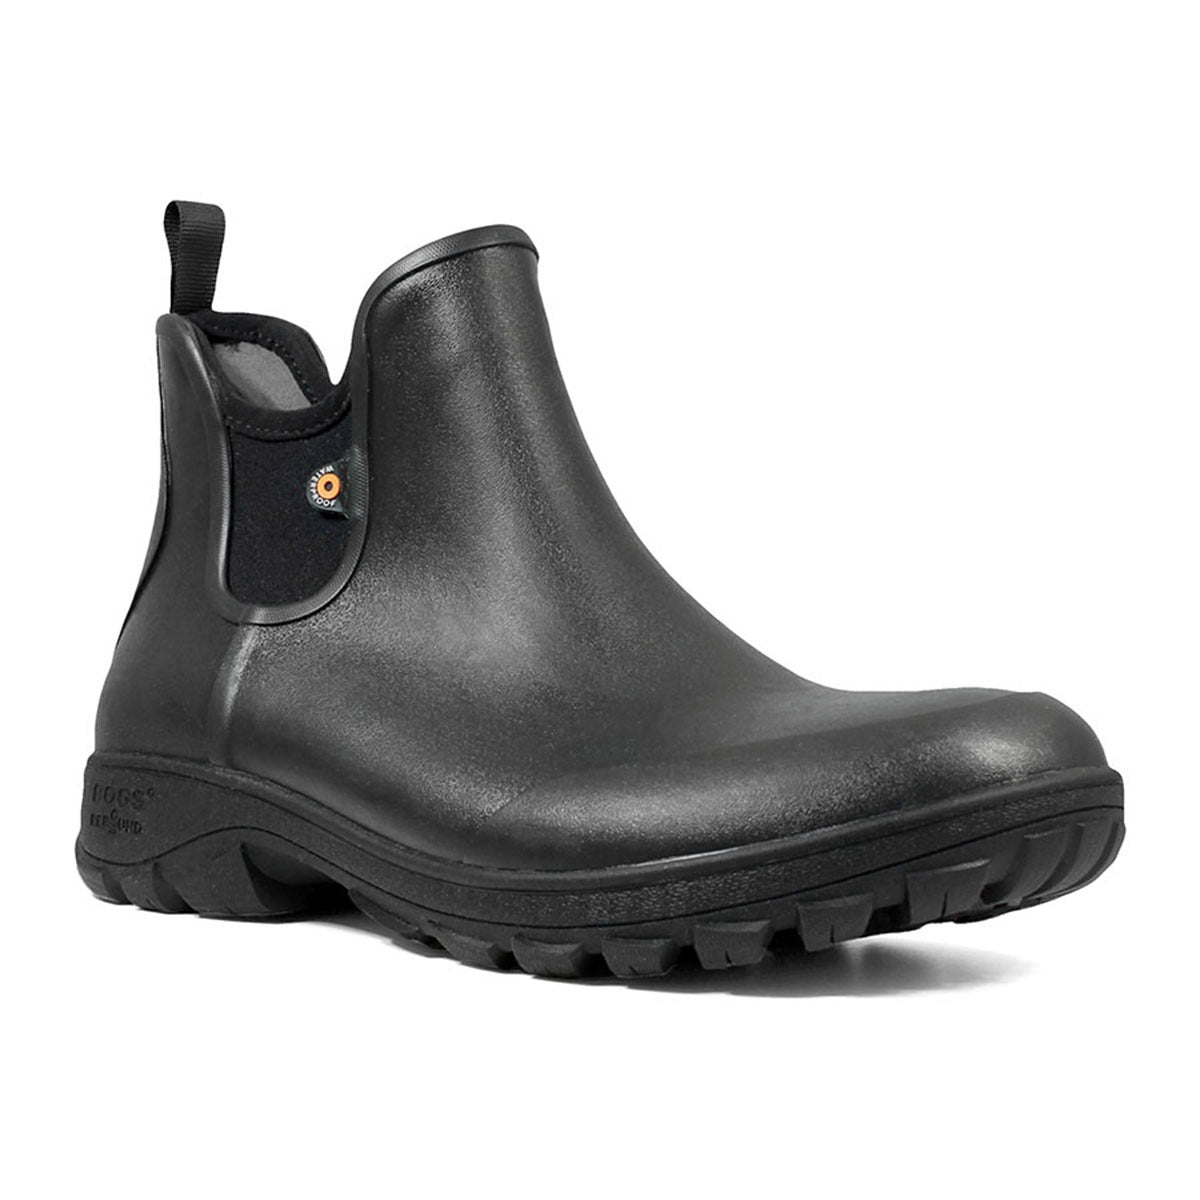 Black waterproof ankle boot with pull tab, elastic side panels, and anti-slip outsole: Bogs Sauvie Slip On Brown - Mens